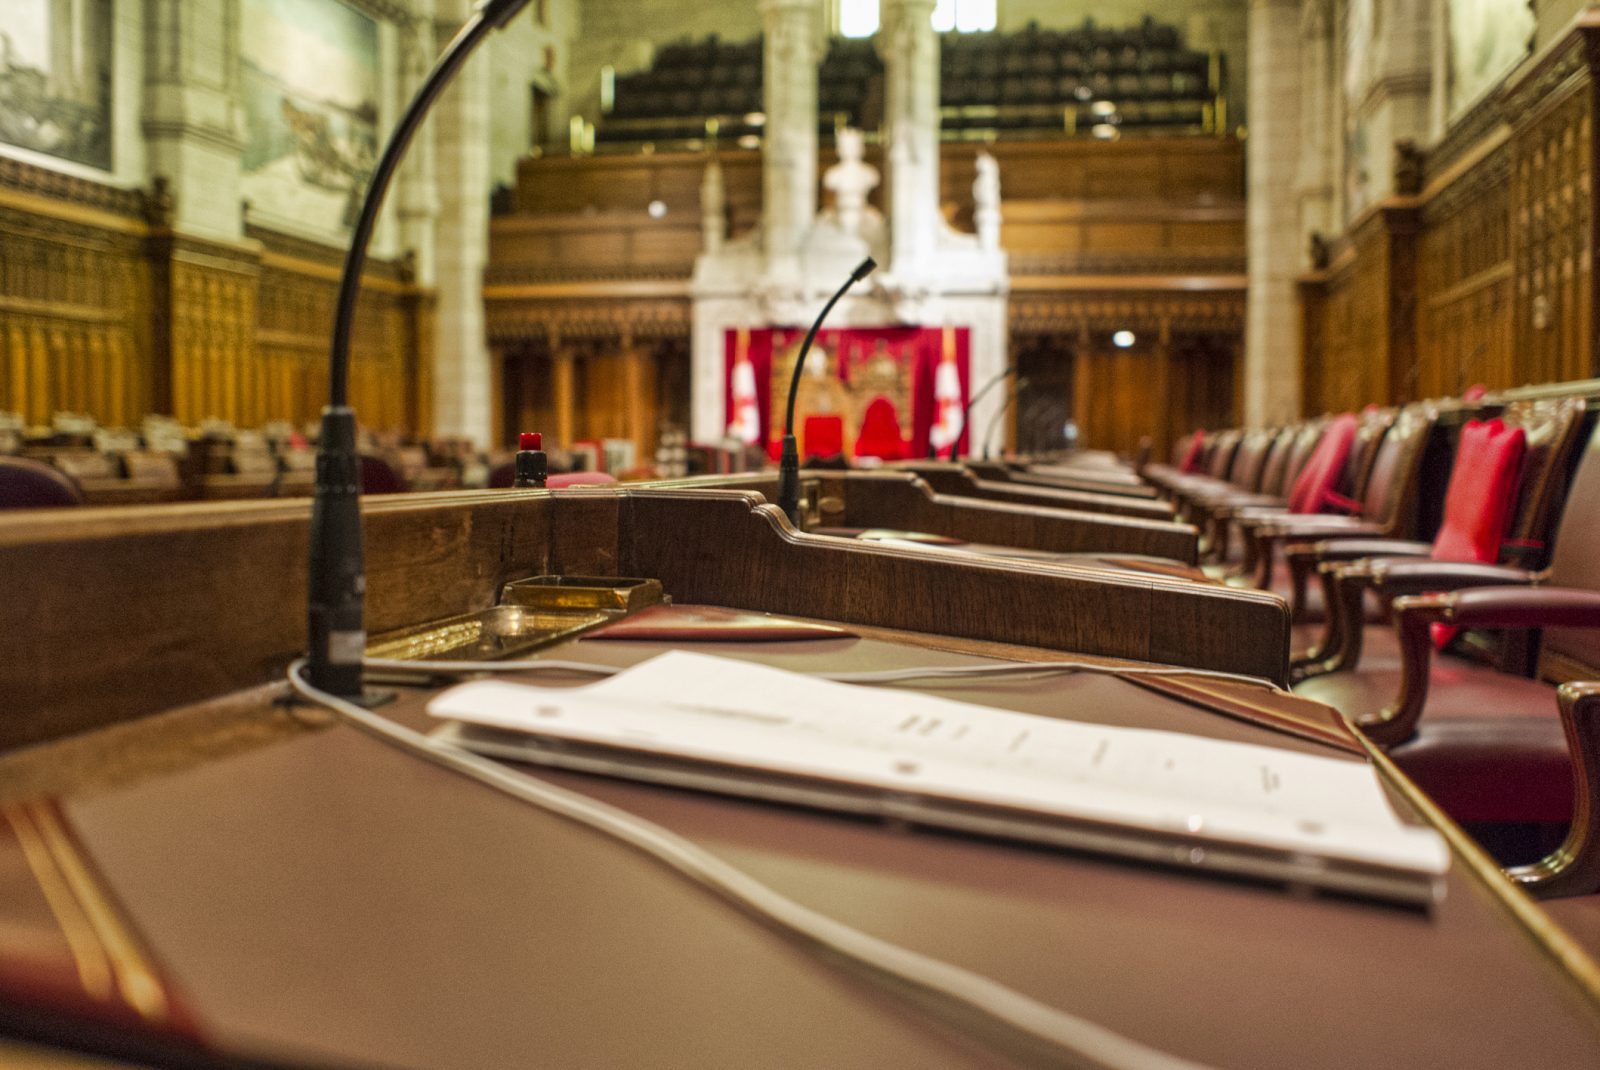 Close up of a Senator's desk with paperwork in the chambers of the Senate of Canada. The Speaker's chair can be seen in the background.